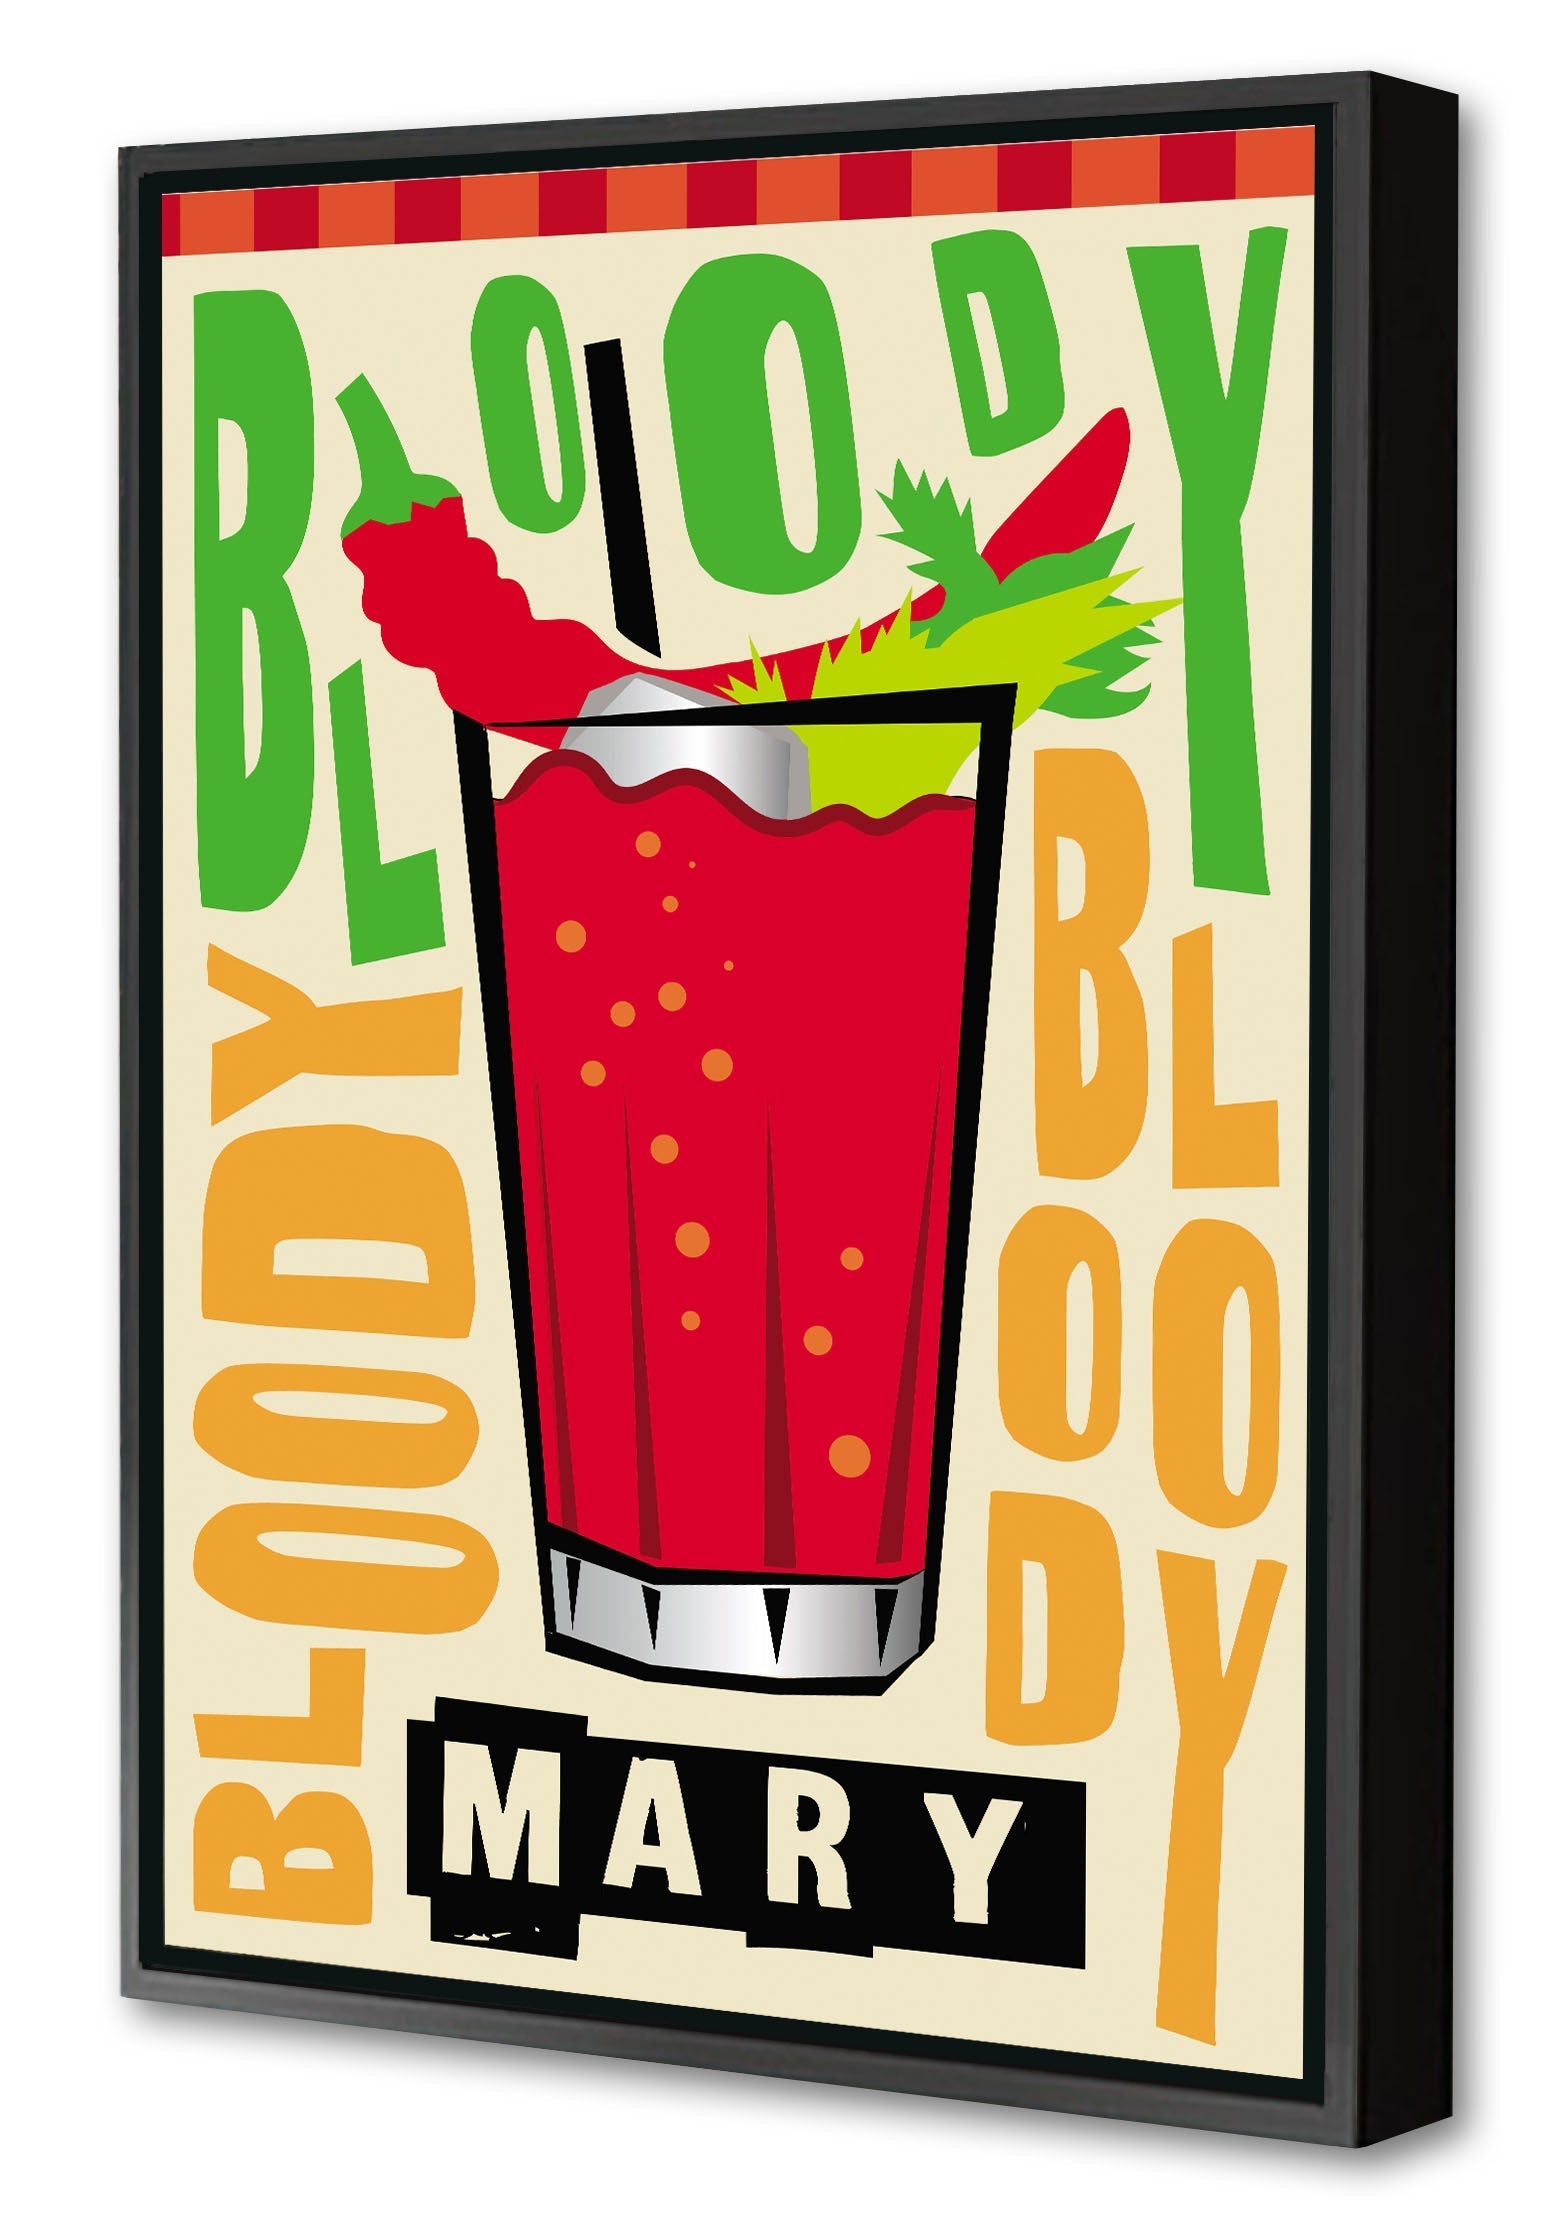 Bloody Mary-cocktails, print-Canvas Print with Box Frame-40 x 60 cm-BLUE SHAKER